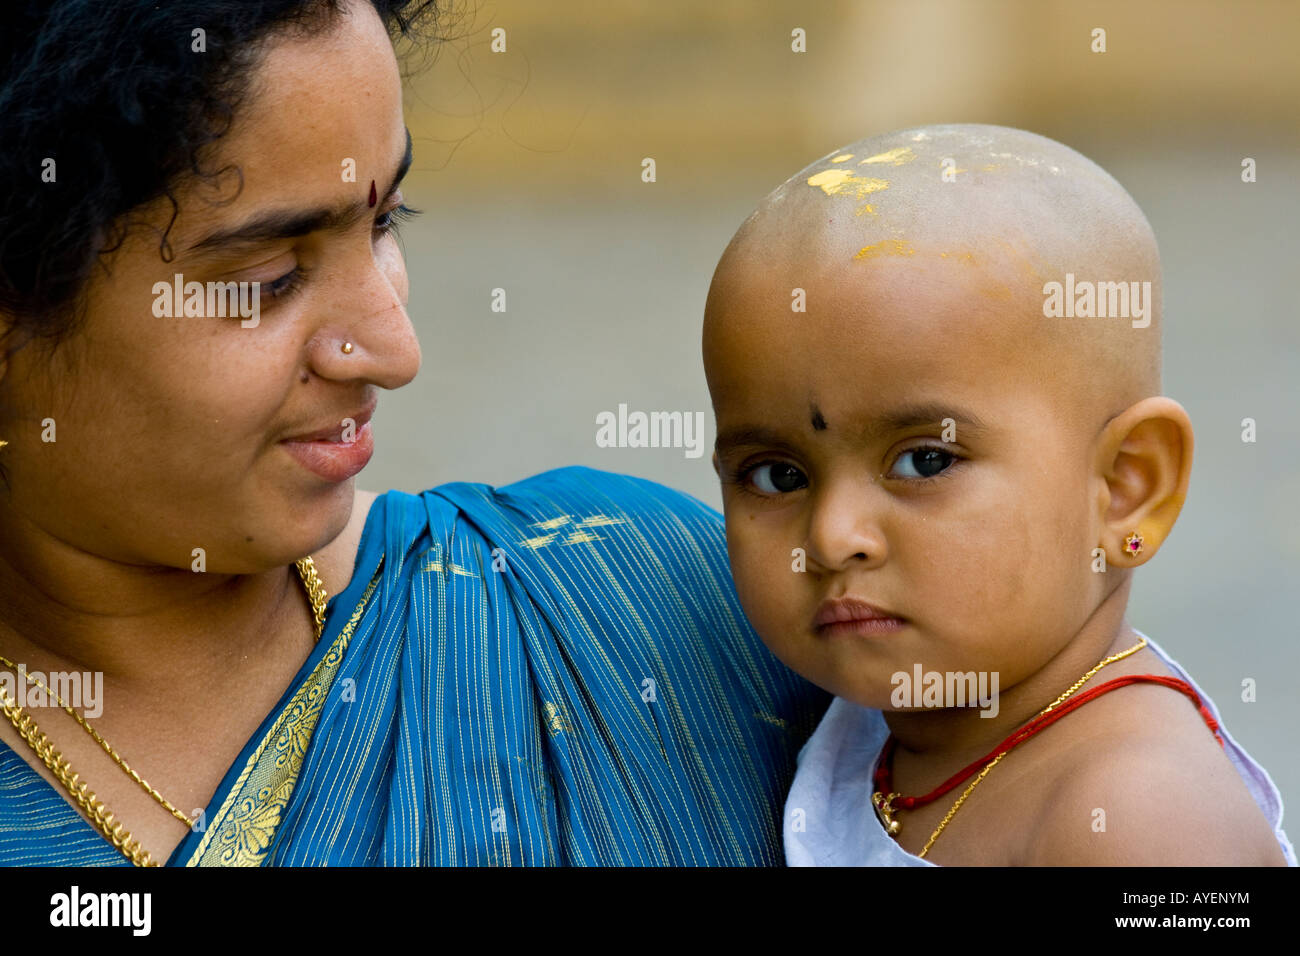 Indian Mother and Baby at Sree Meenakshi Hindu Temple in Madurai South India Stock Photo